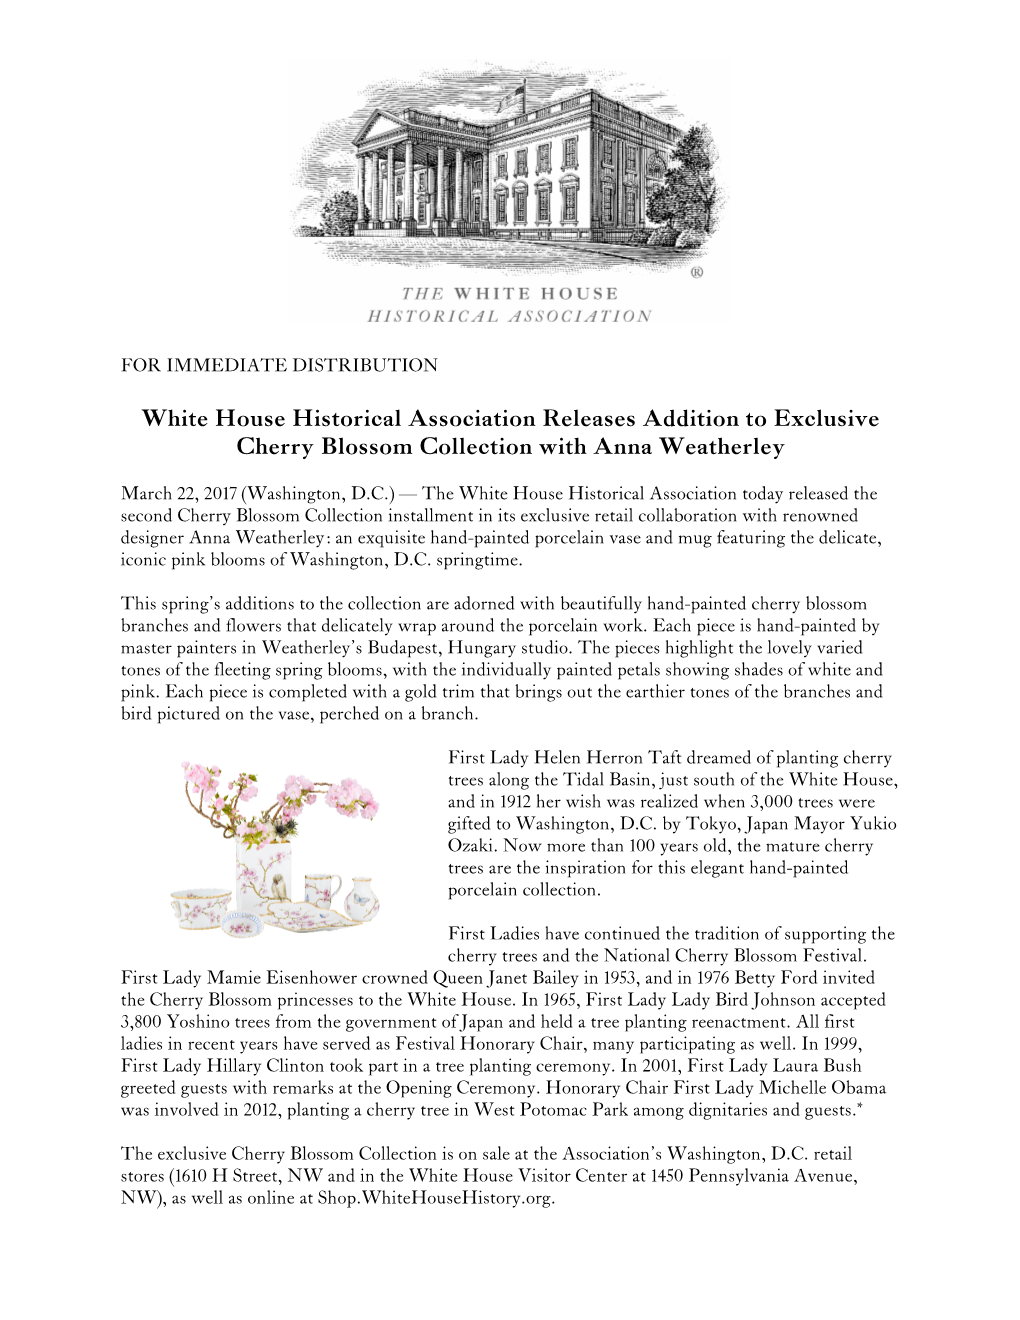 White House Historical Association Releases Addition to Exclusive Cherry Blossom Collection with Anna Weatherley